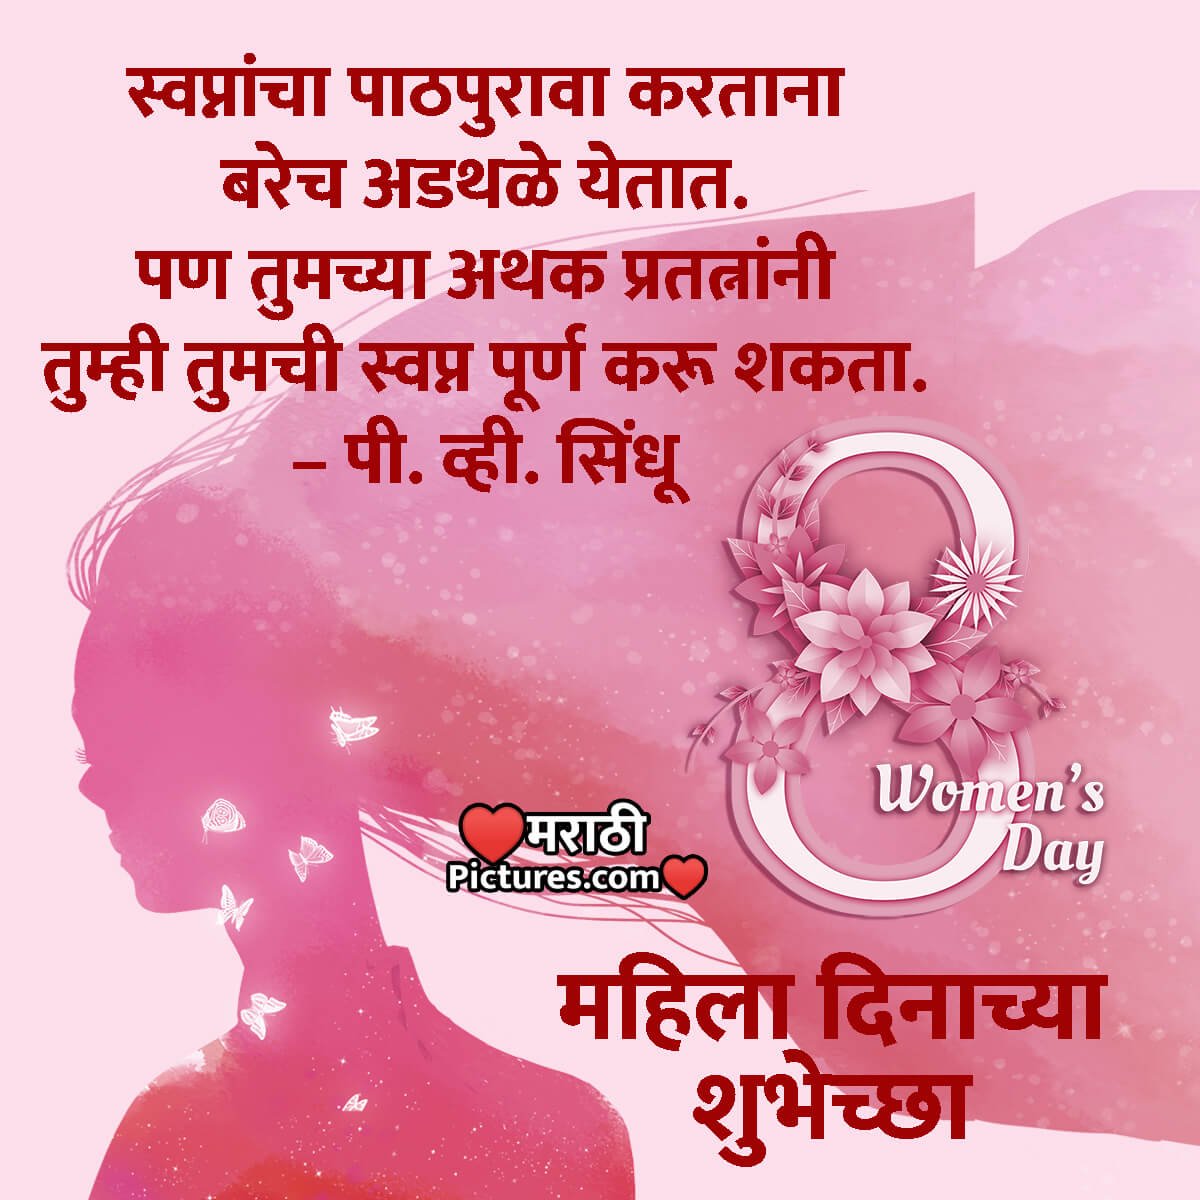 Inspirational Women's Day Quotes In Marathi - MarathiPictures.com